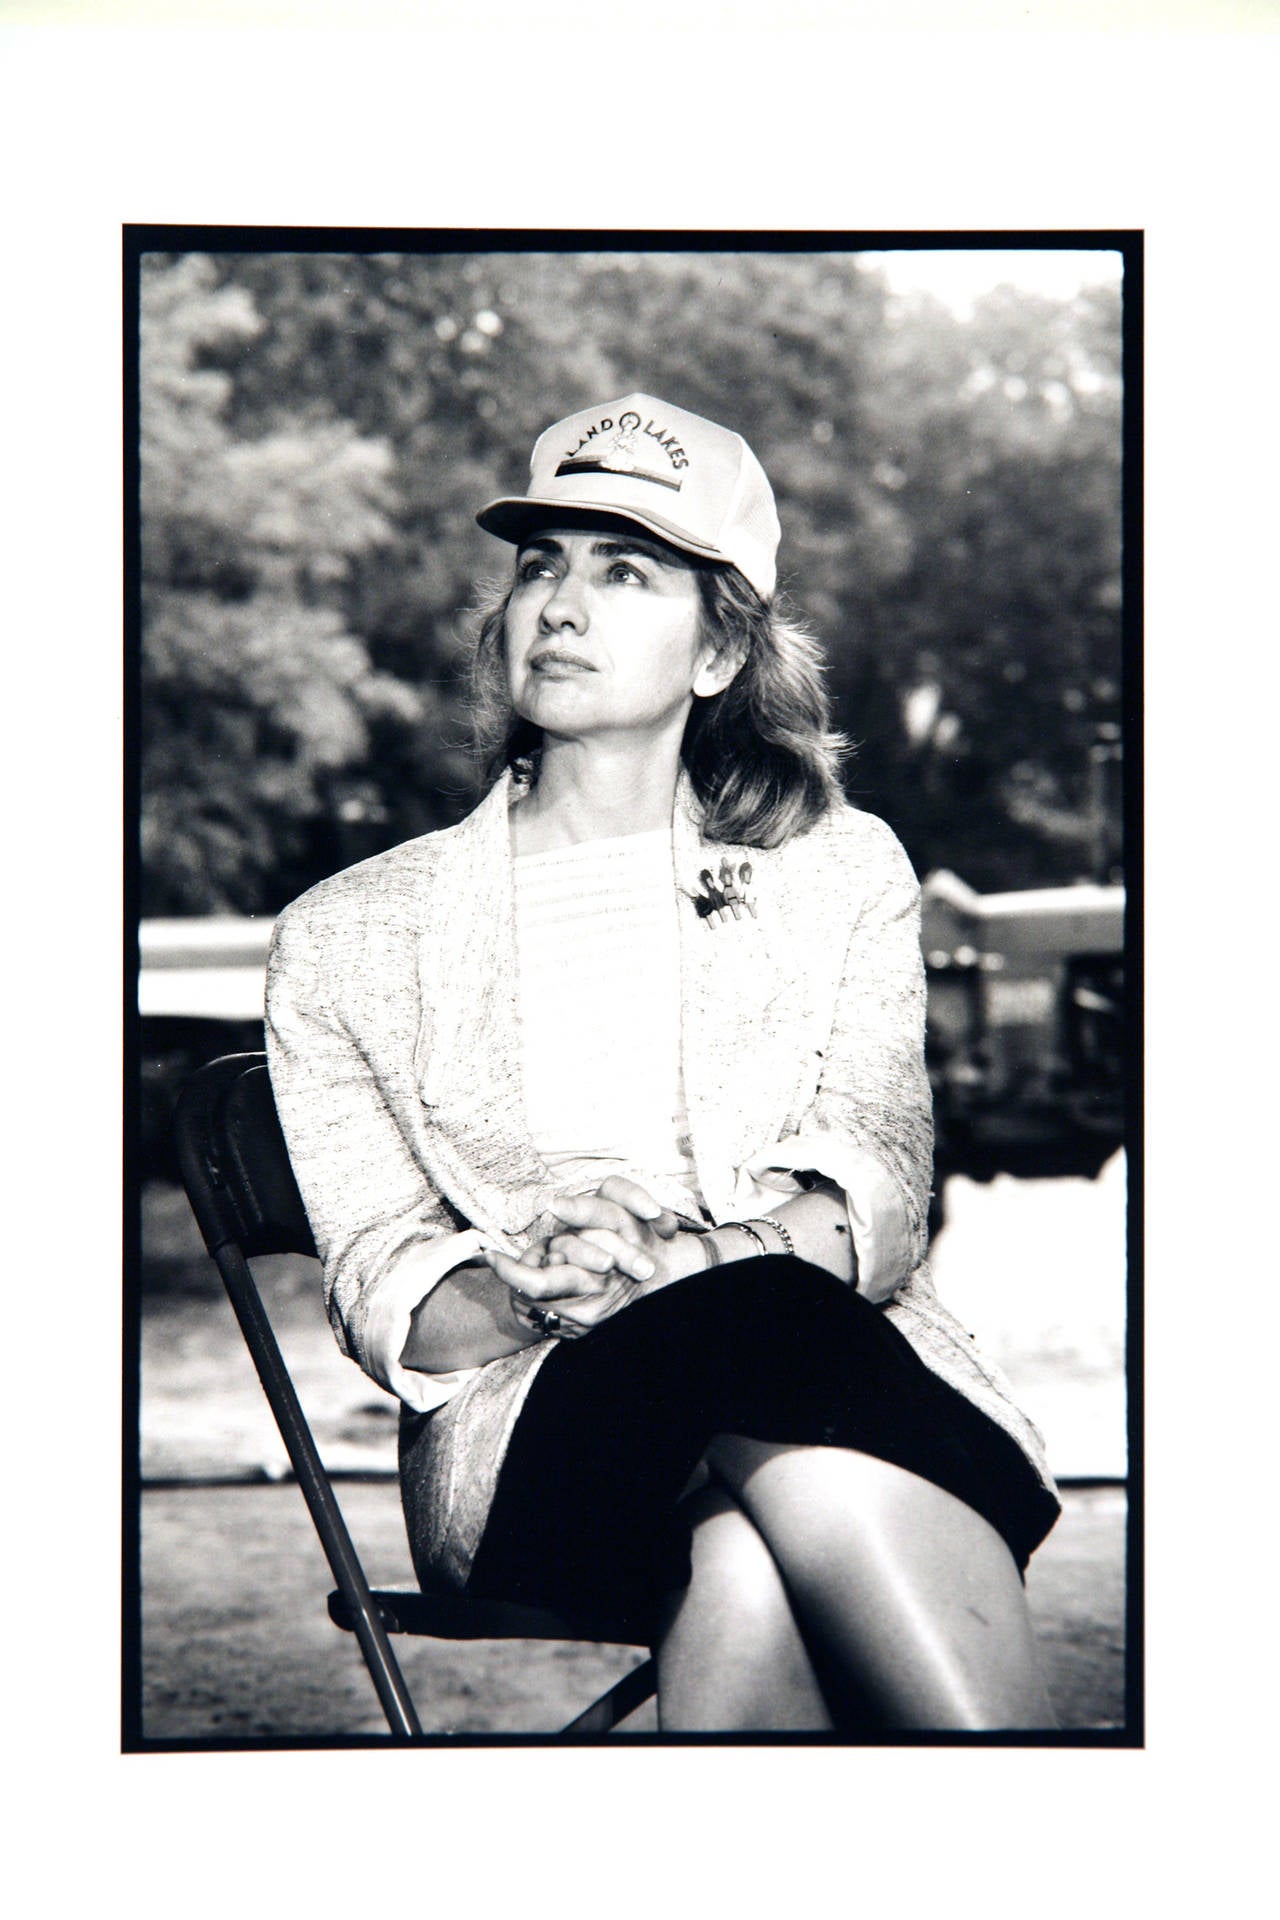 Unknown Portrait Photograph - Hillary Clinton with Land-O-Lakes Cap